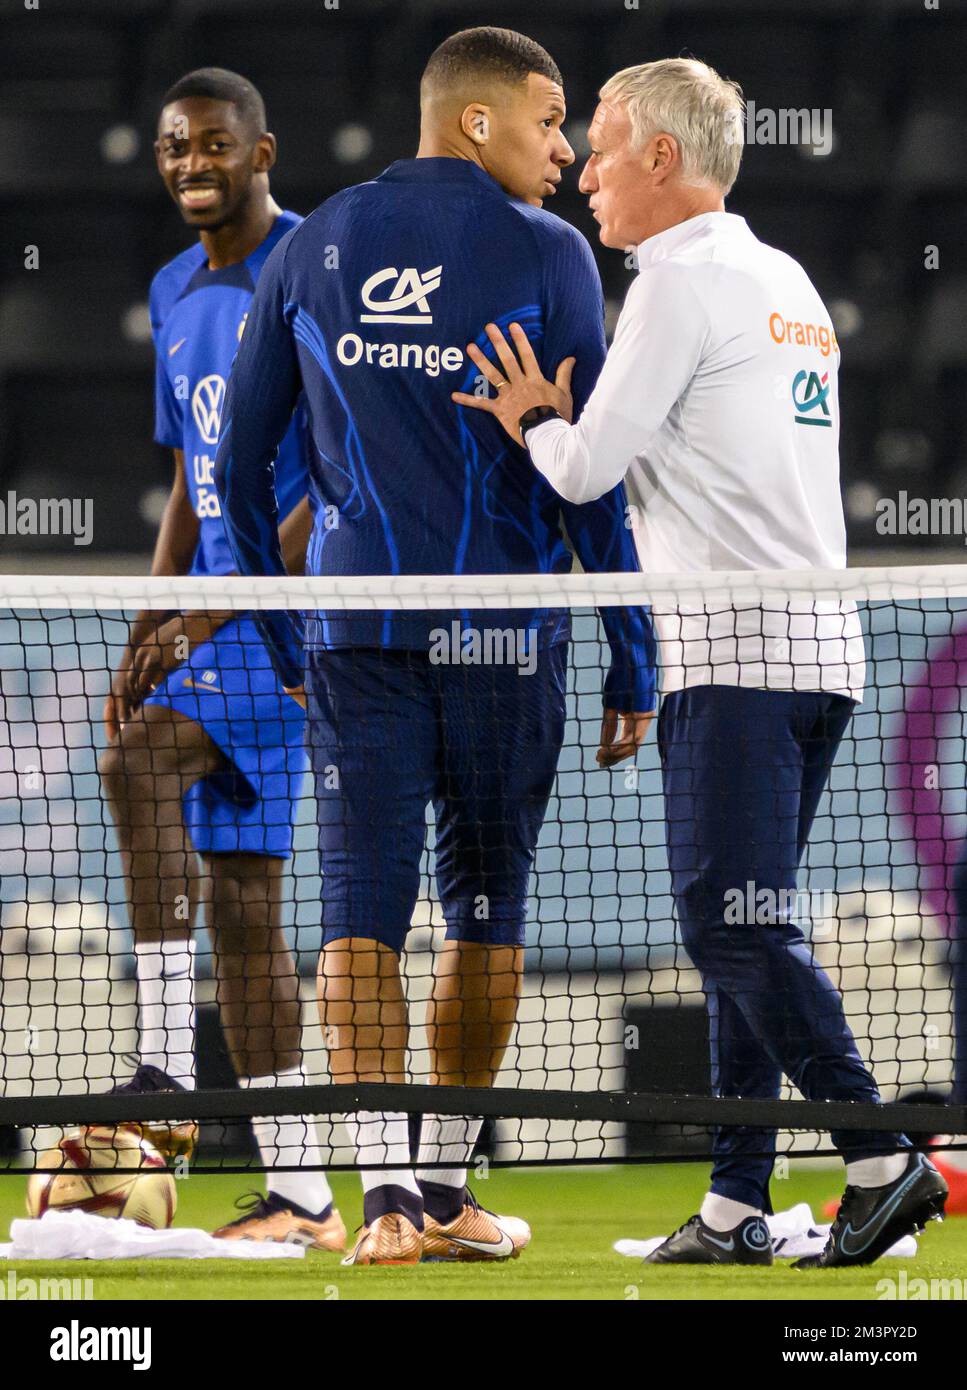 Doha, Qatar. 16th Dec, 2022. Soccer: World Cup, Before the final Argentina - France, press conference France at Al Sadd SC stadium. France coach Didier Deschamps (r) talks to Kylian Mbappe (M). Credit: Robert Michael/dpa - IMPORTANT NOTE: In accordance with the requirements of the DFL Deutsche Fußball Liga and the DFB Deutscher Fußball-Bund, it is prohibited to use or have used photographs taken in the stadium and/or of the match in the form of sequence pictures and/or video-like photo series./dpa/Alamy Live News Stock Photo